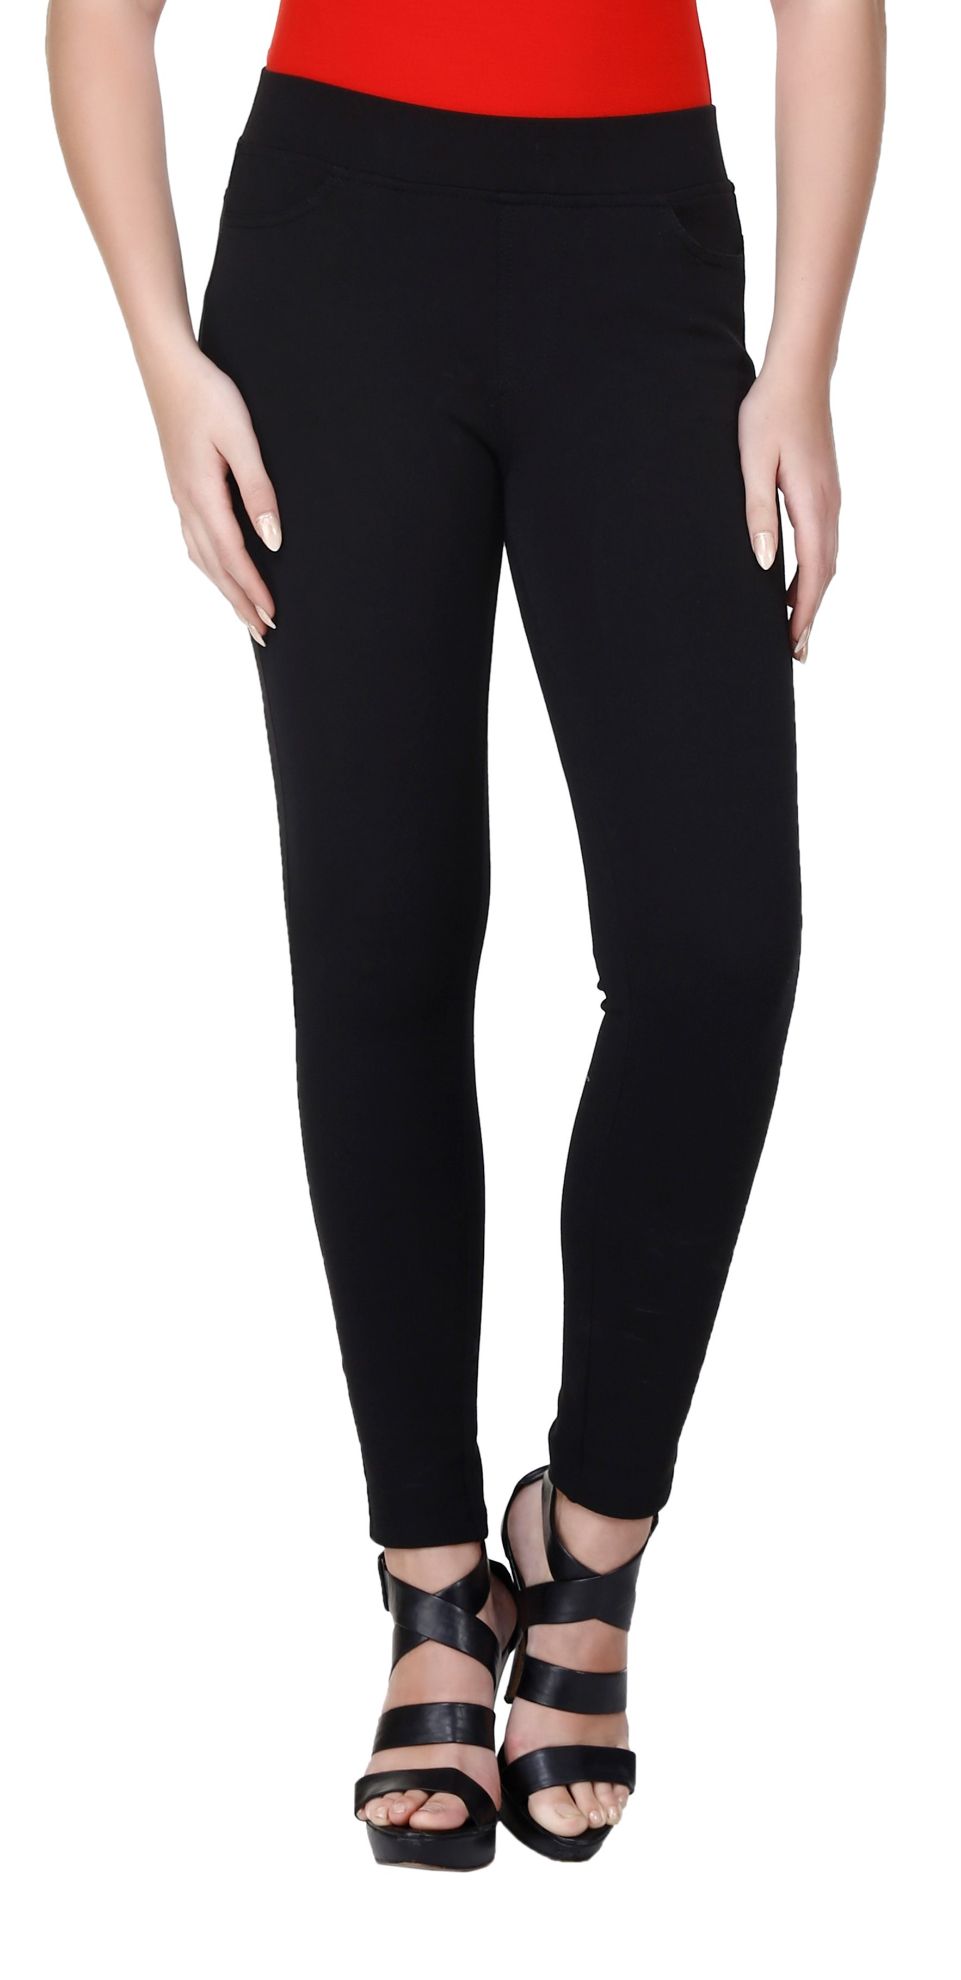 https://frenchtrendz.com/images/thumbs/0005420_frenchtrendz-cotton-viscose-spandex-black-jeggings.jpeg